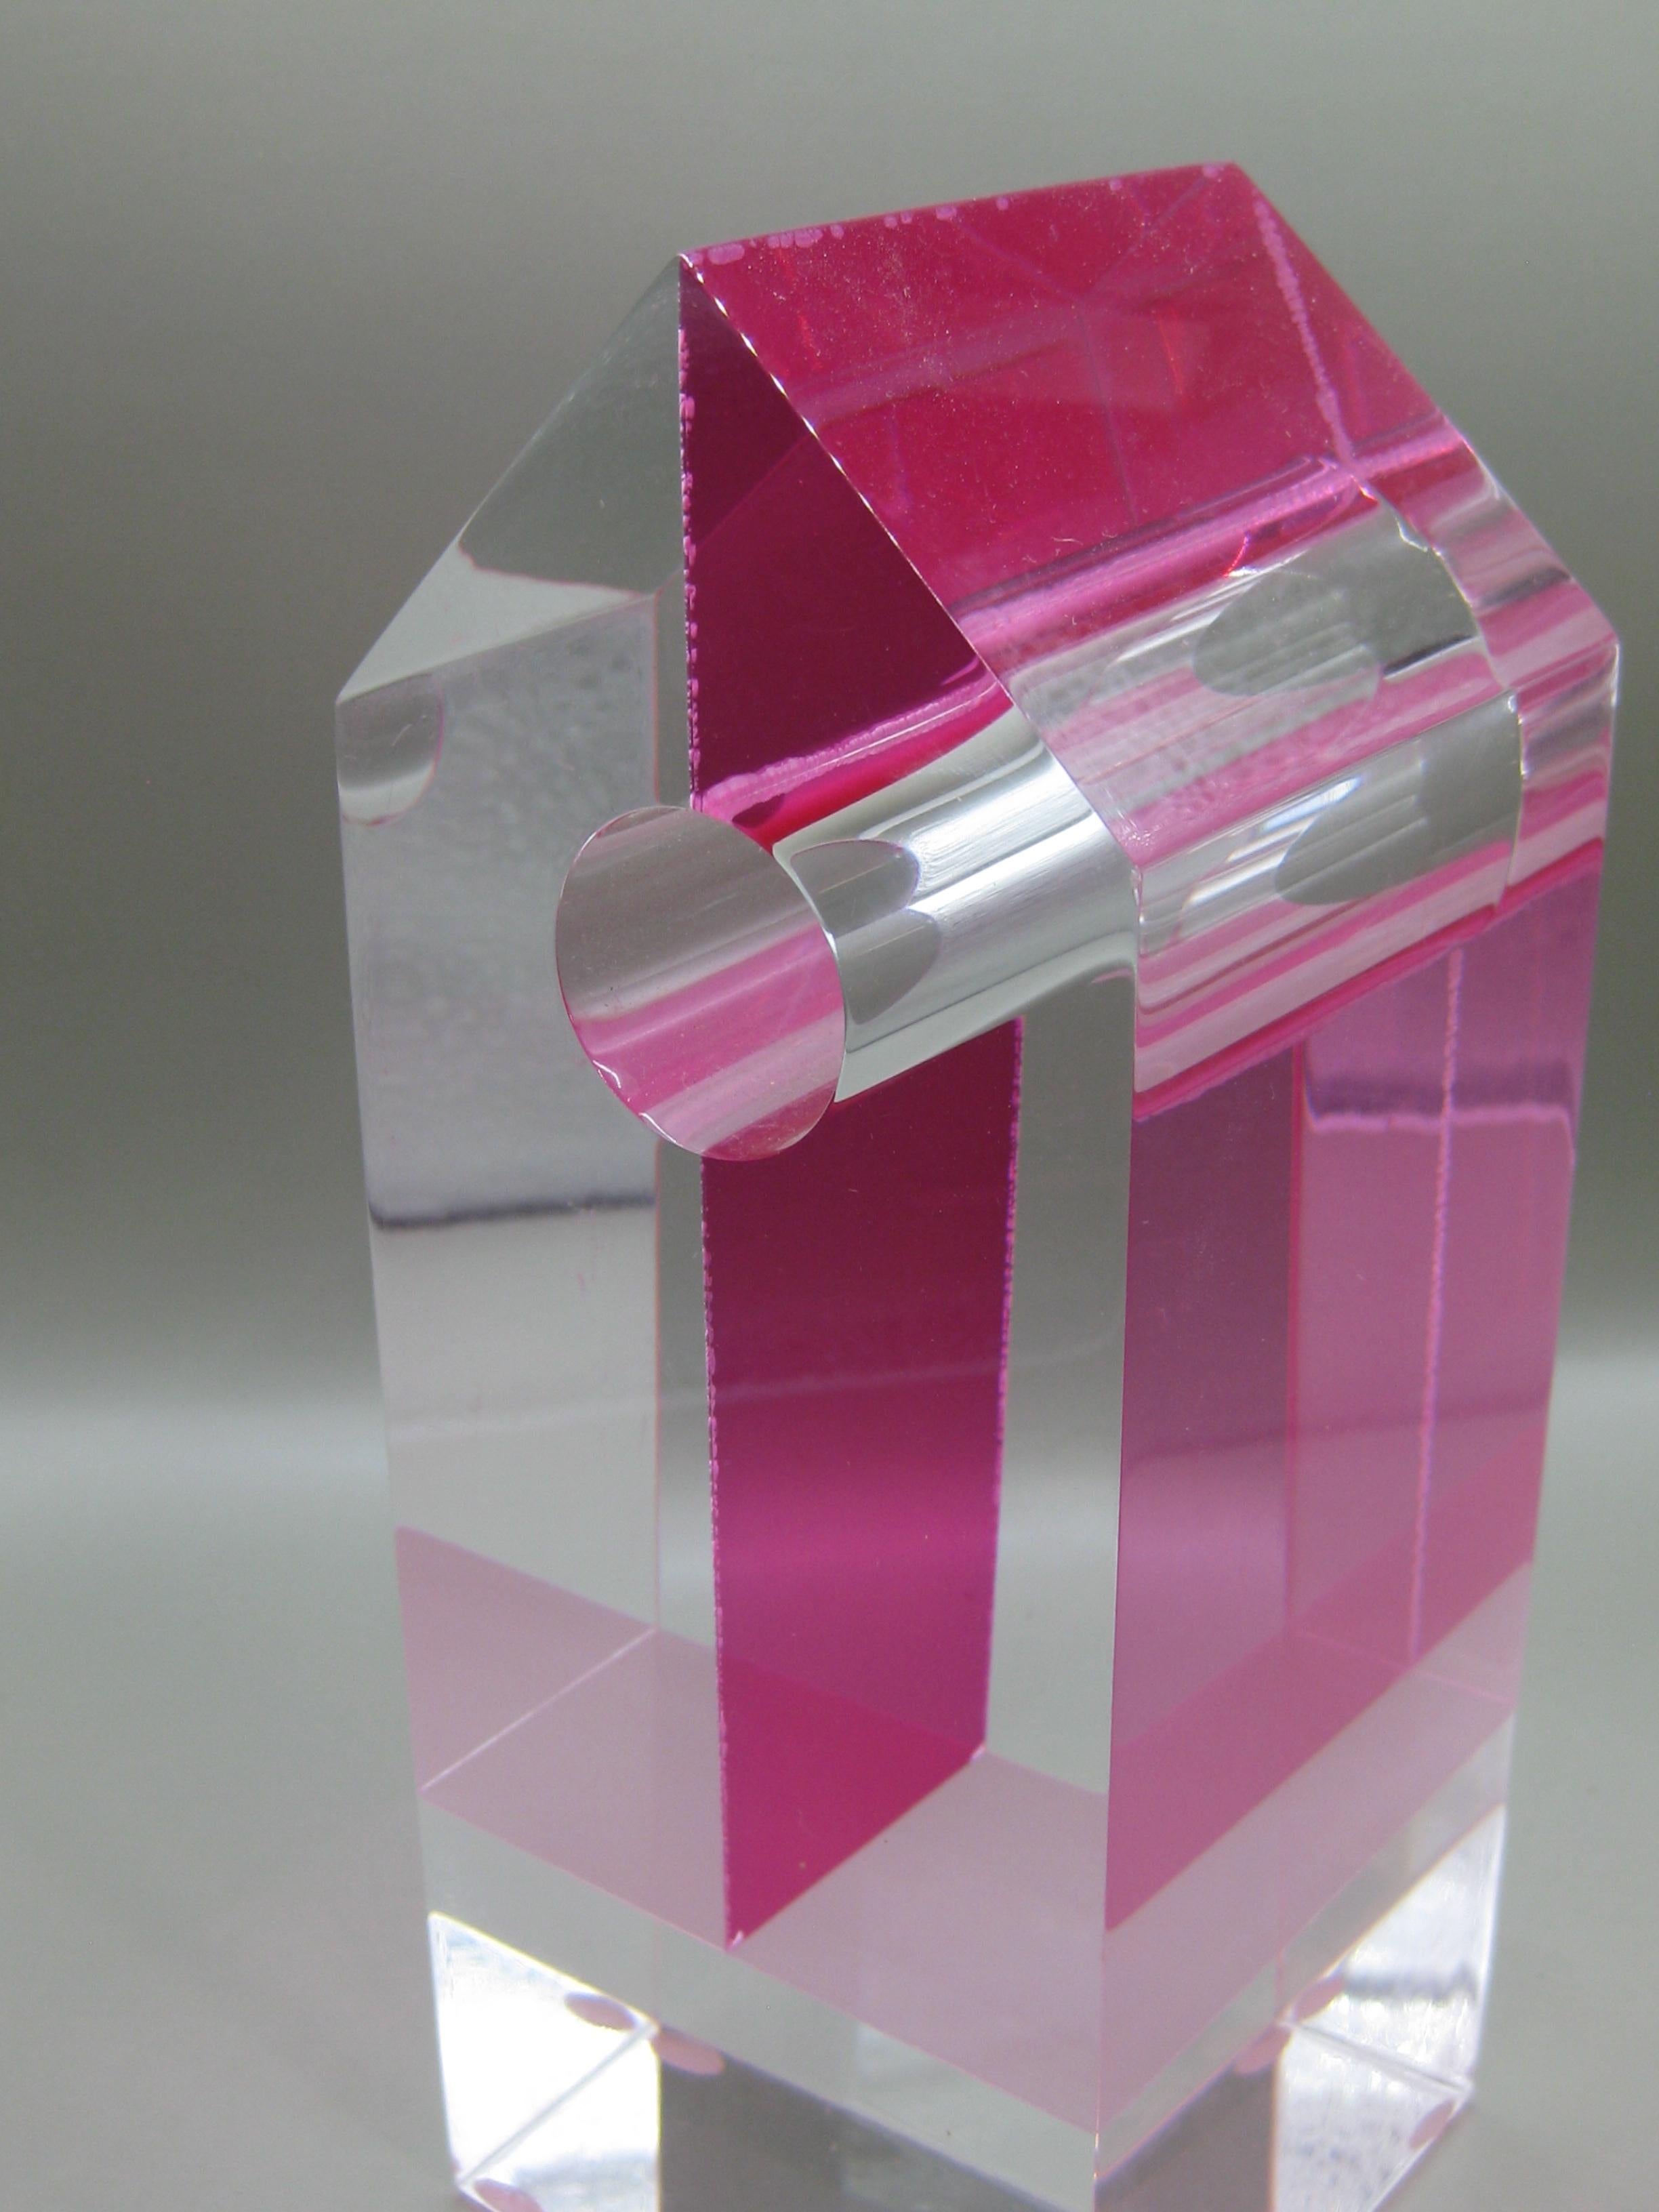 1960's-1970's Lucite Acrylic Optical Op Art Abstract Sculpture For Sale 7